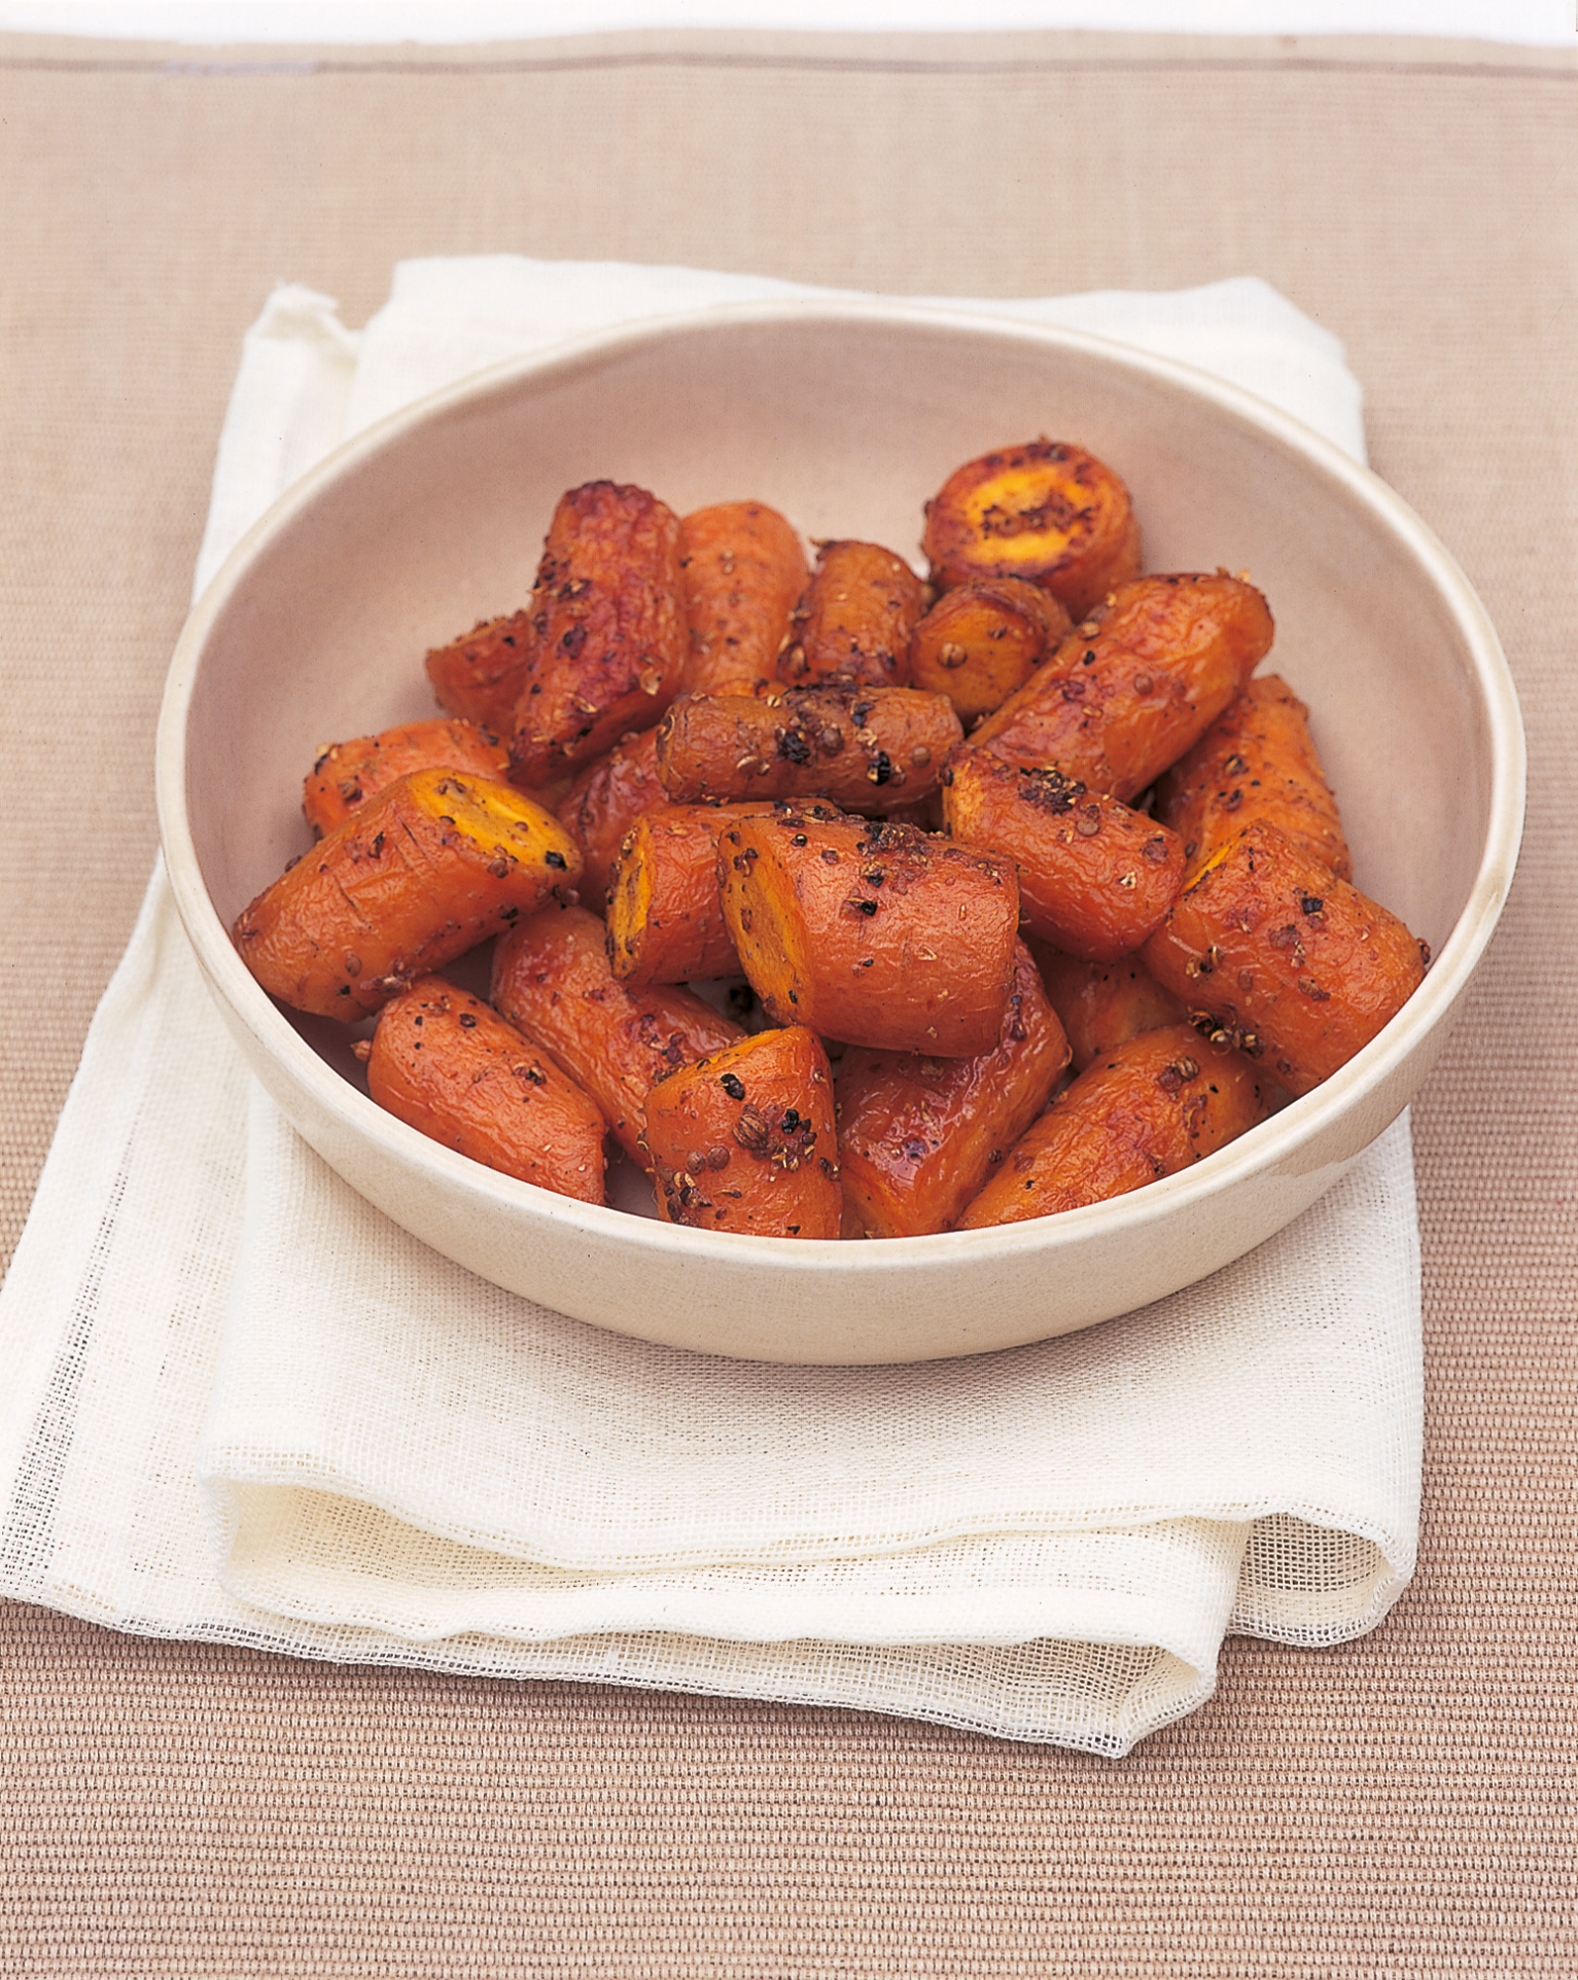 Oven-roasted Carrots with Garlic and Coriander | Recipes | Delia Online